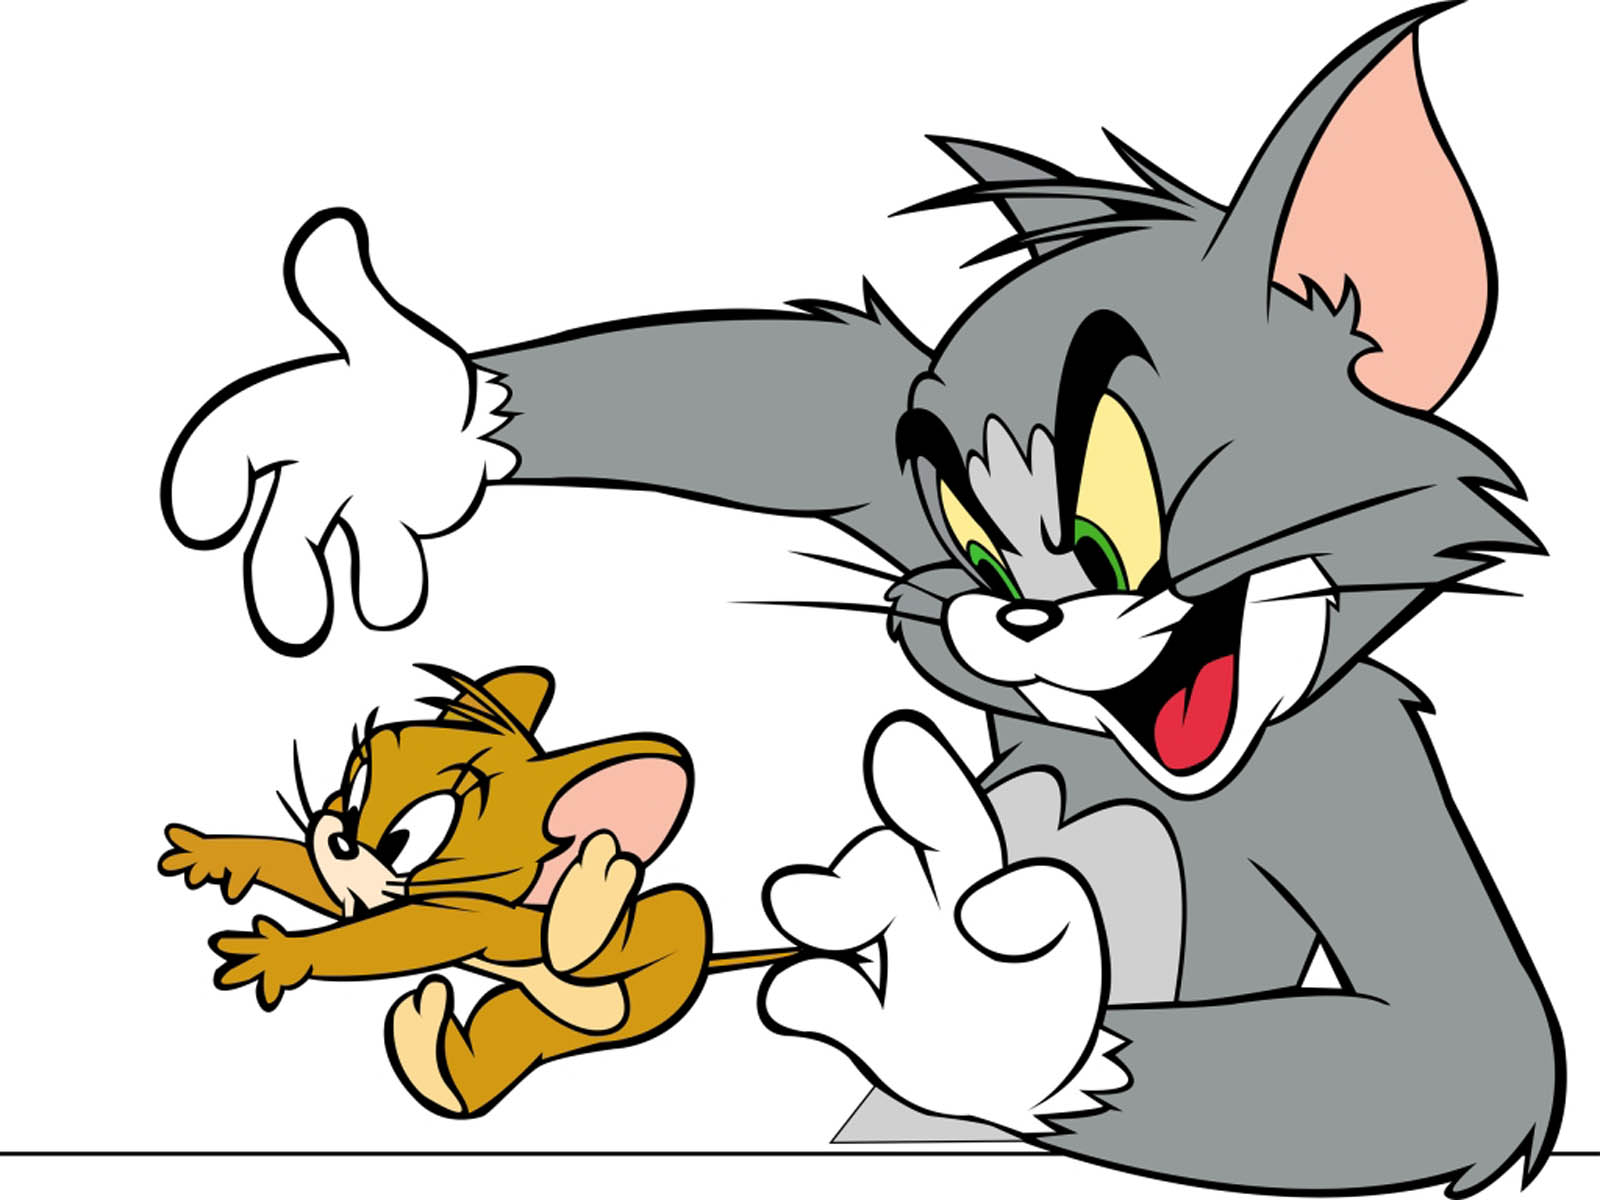 Tom And Jerry Cartoon Quotes. QuotesGram